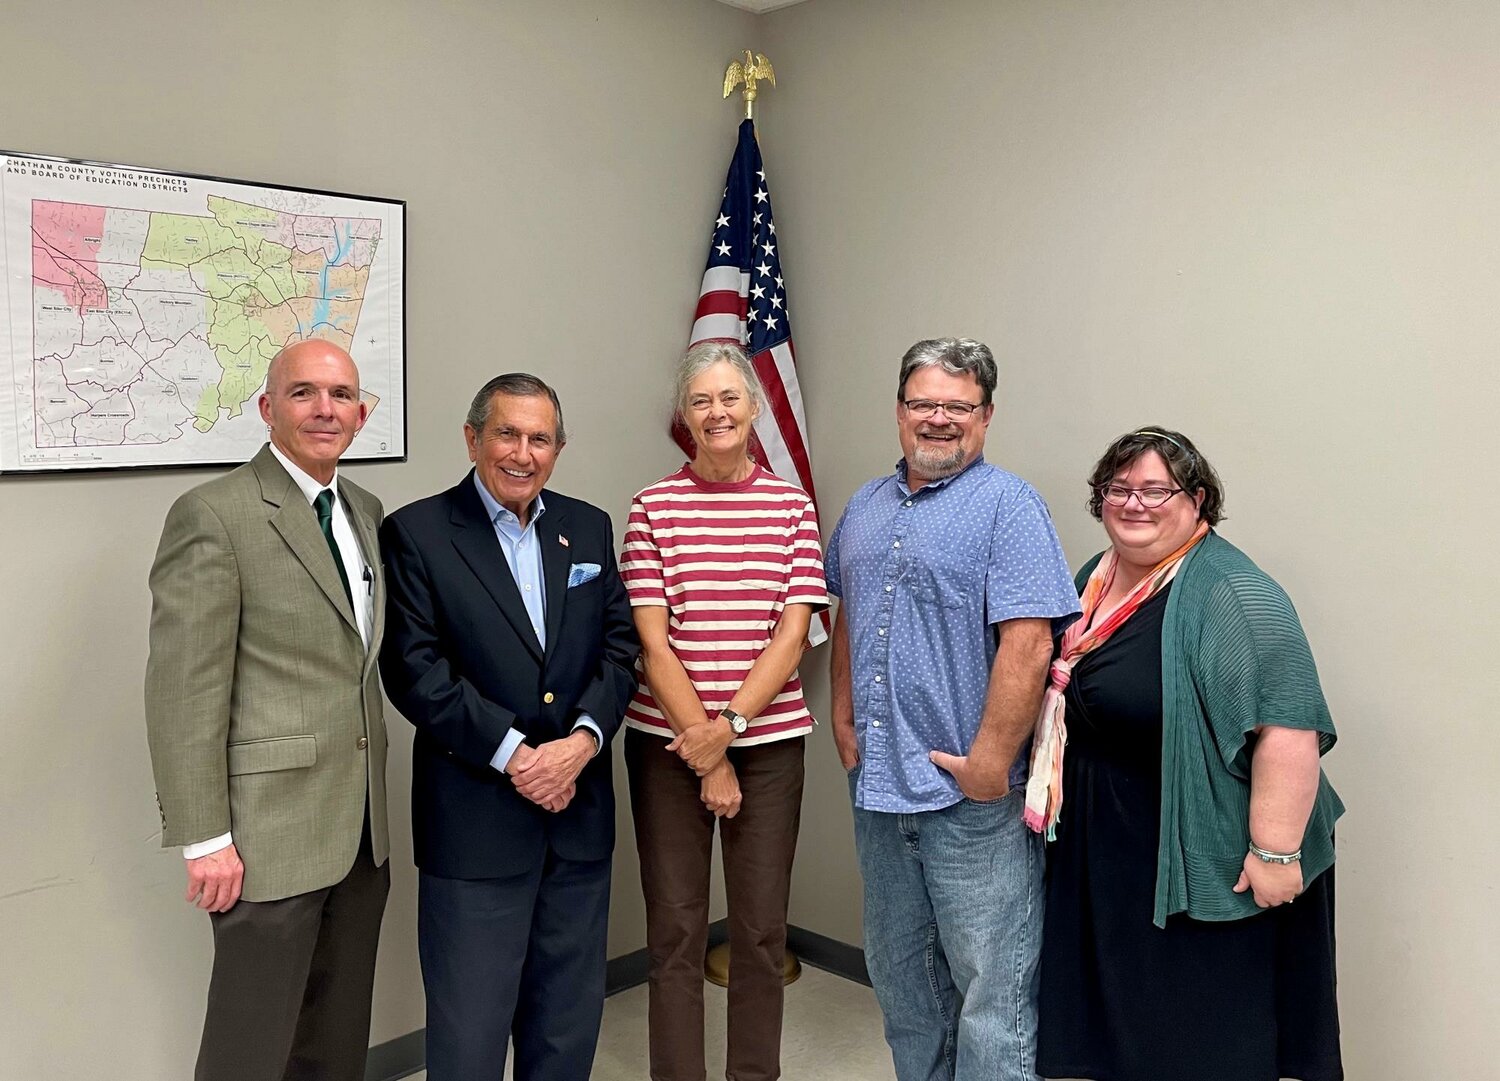 Chatham County Board of Elections members pictured (from left to right): Frank Dunphy II, Charles Ramos, Laura Heise, Mark Barroso, and Amy Meek.